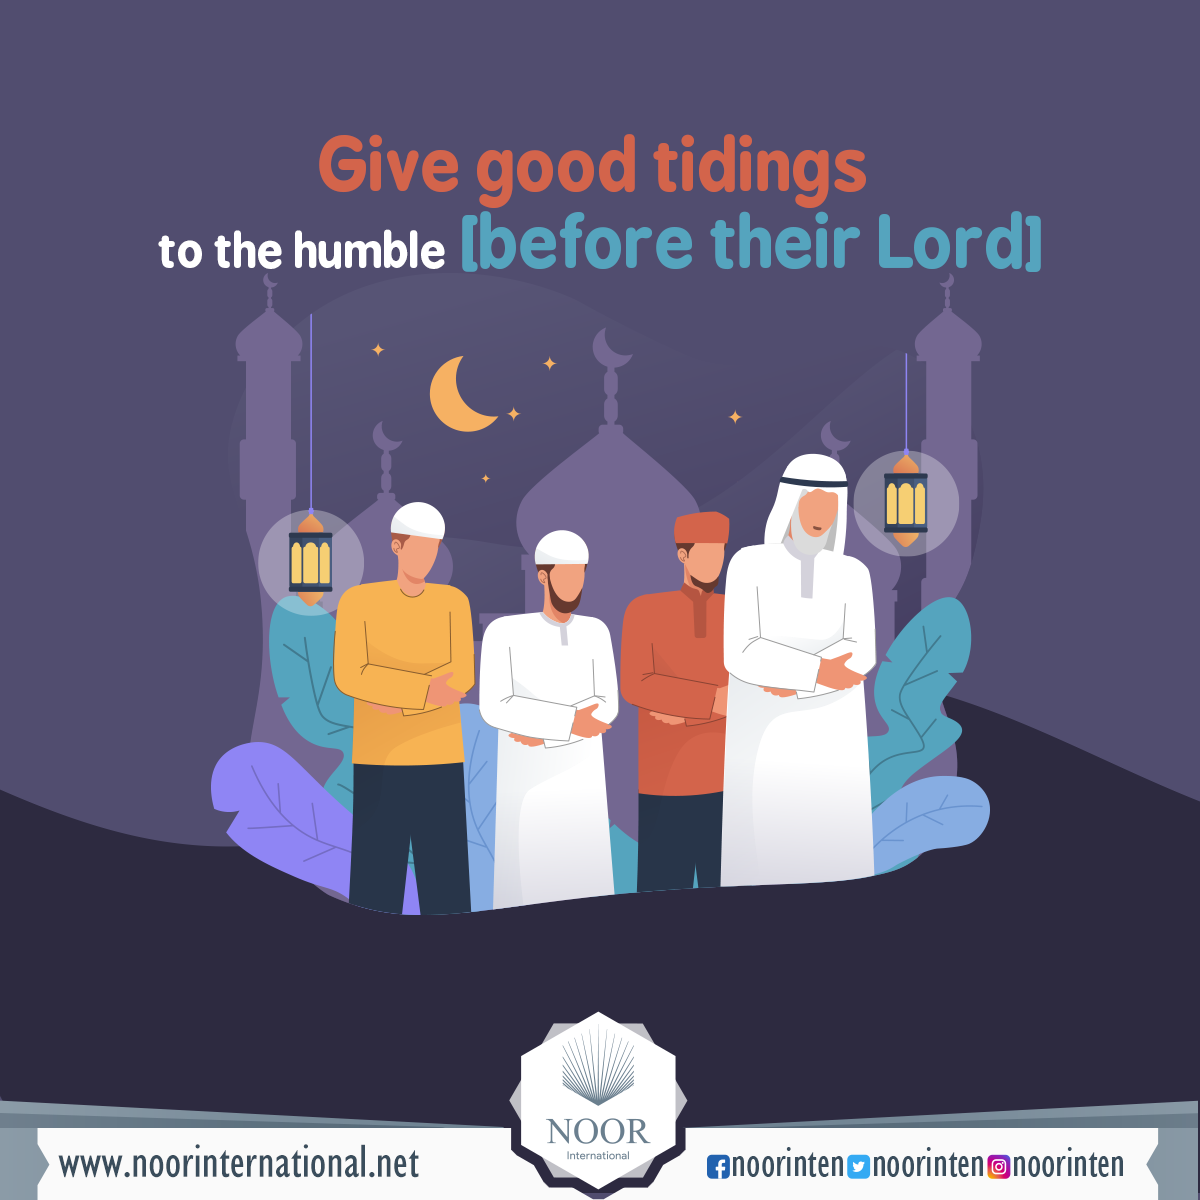 Give good tidings to the humble [before their Lord]